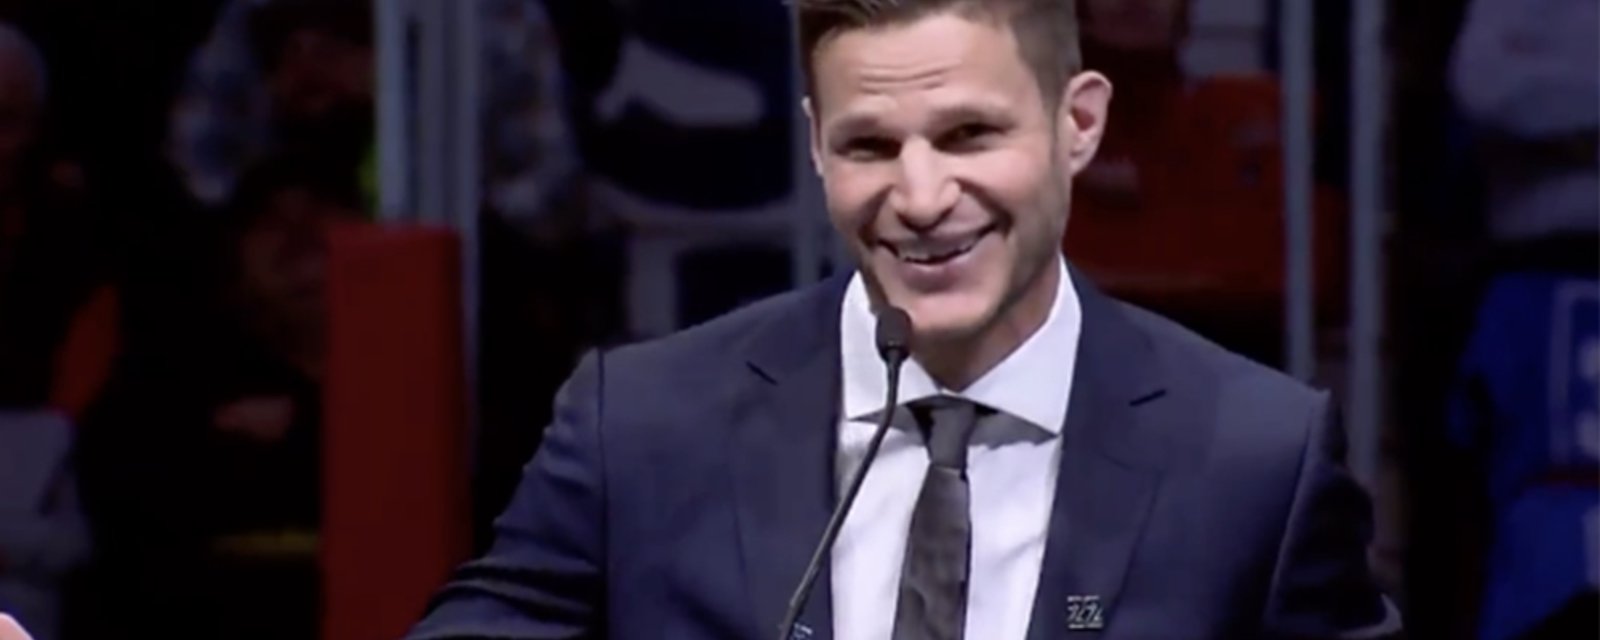 Bieksa steals the show with incredible roast at Sedins retirement ceremony